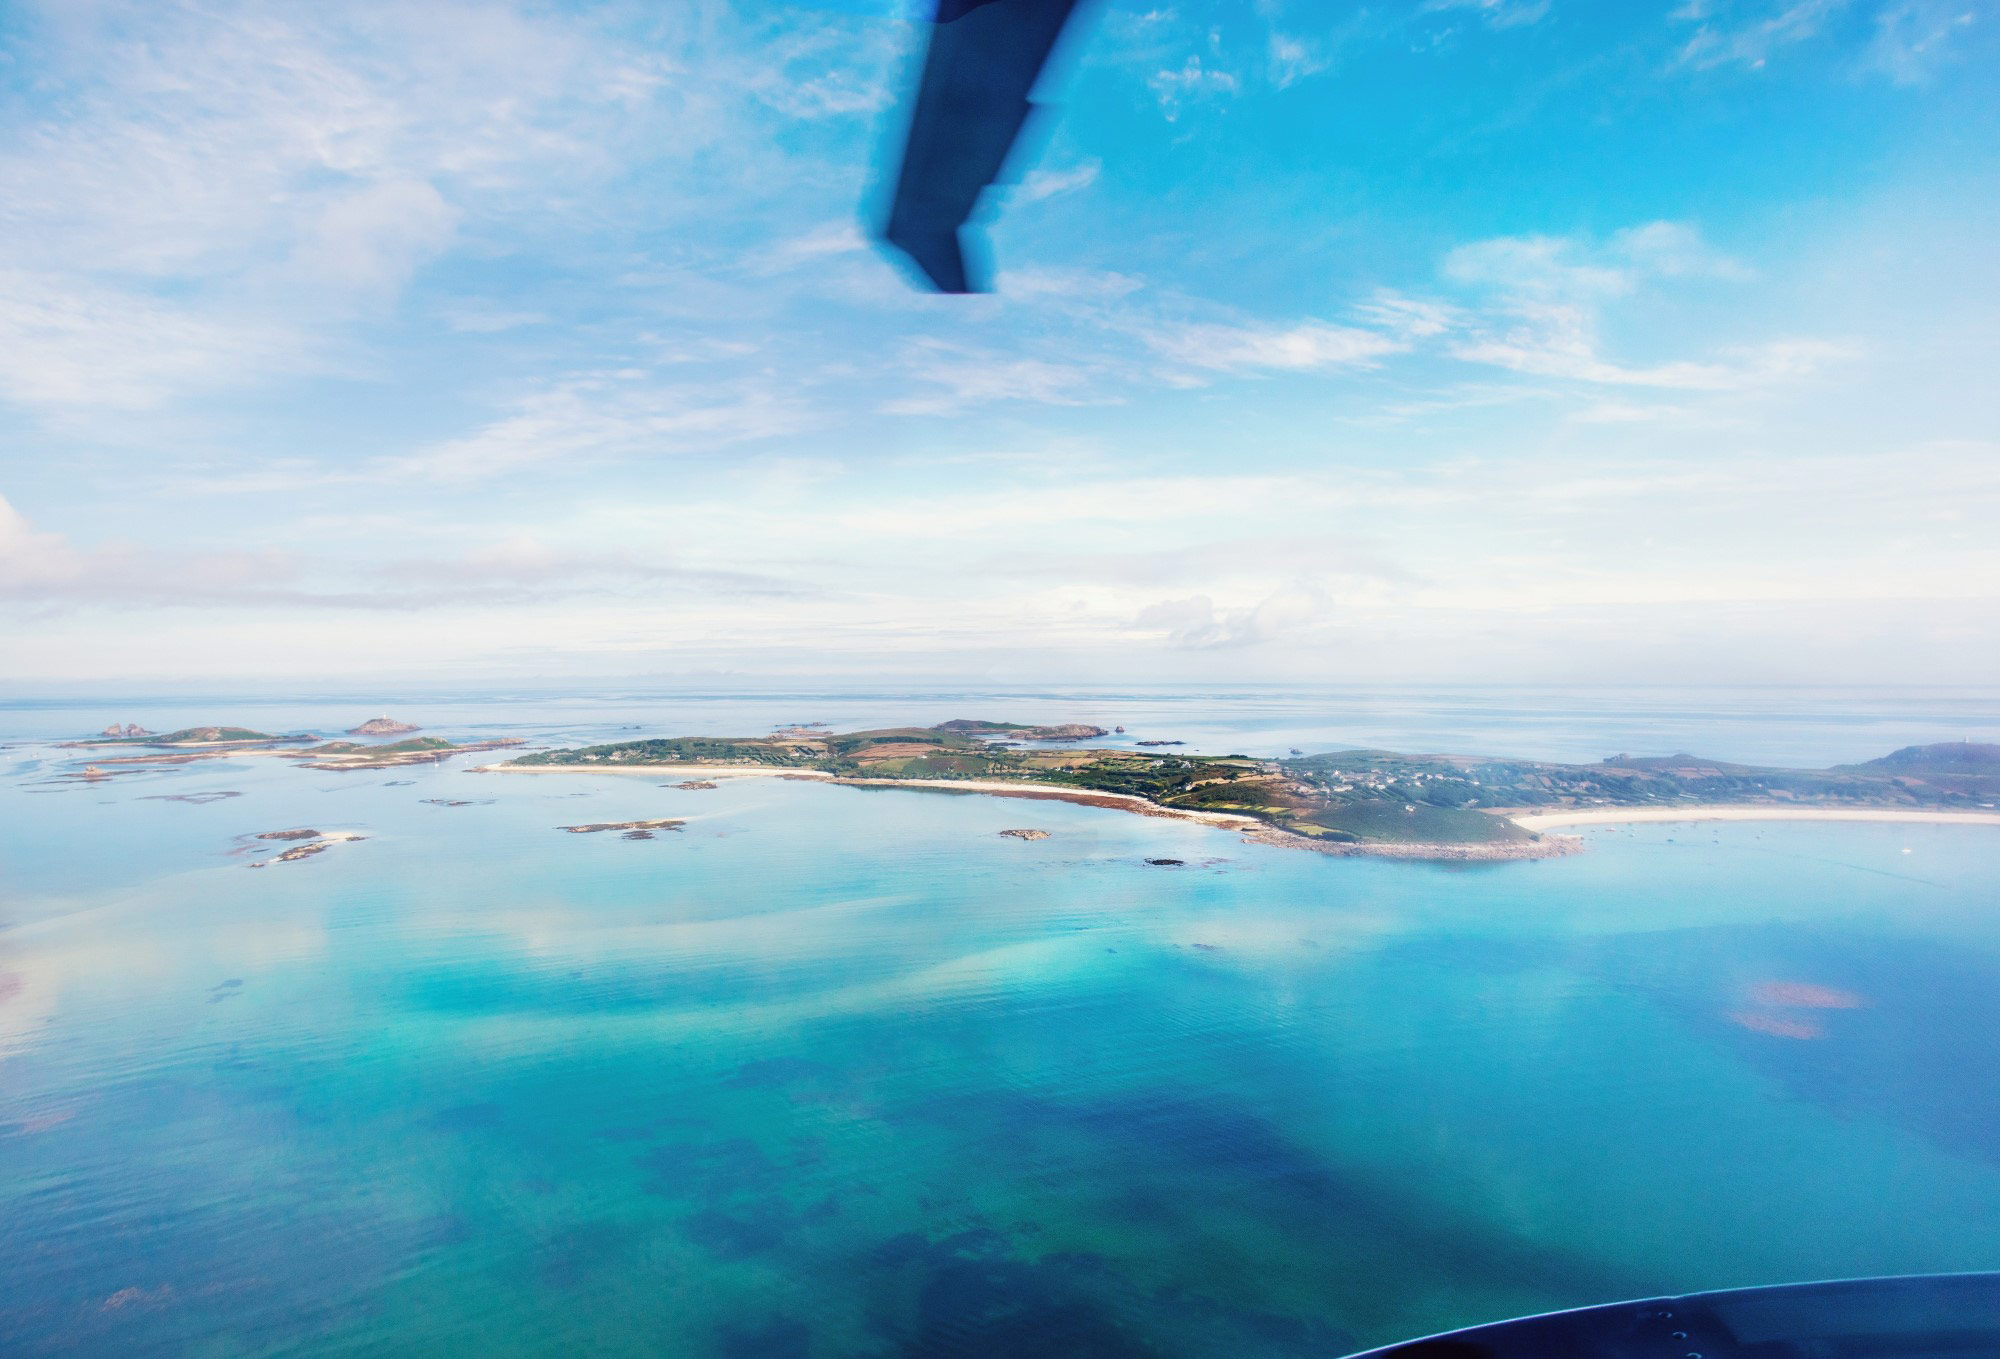 St Martin's Isles of Scilly seen from Penzance Helicopters